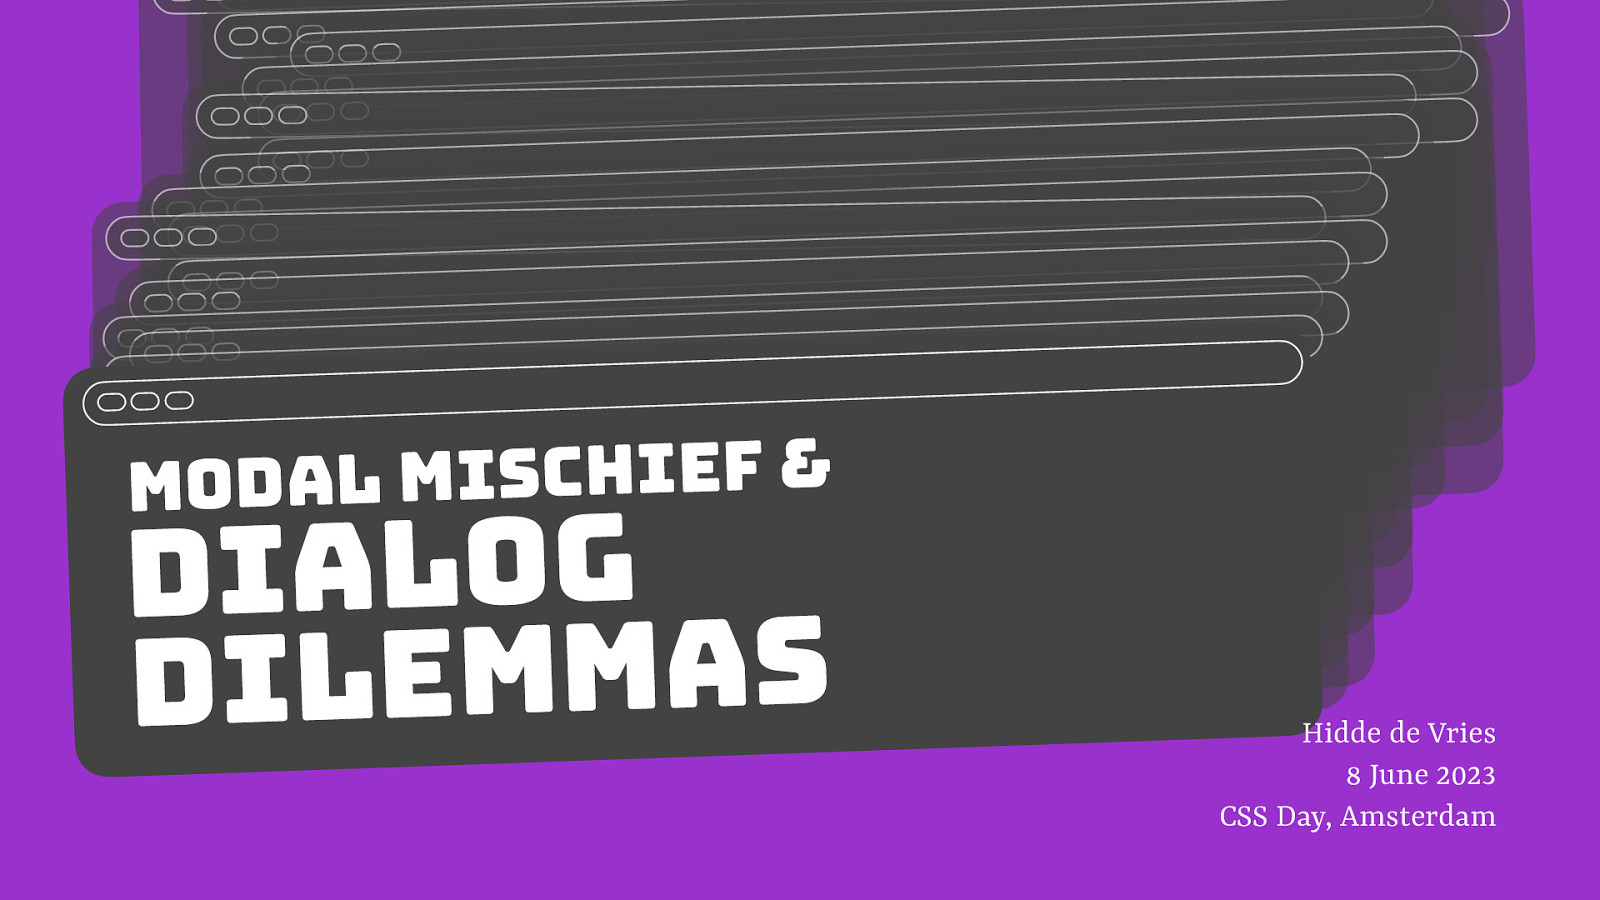 Dialog dilemmas and modal mischief: a deep dive into popovers and how to build them by Hidde de Vries